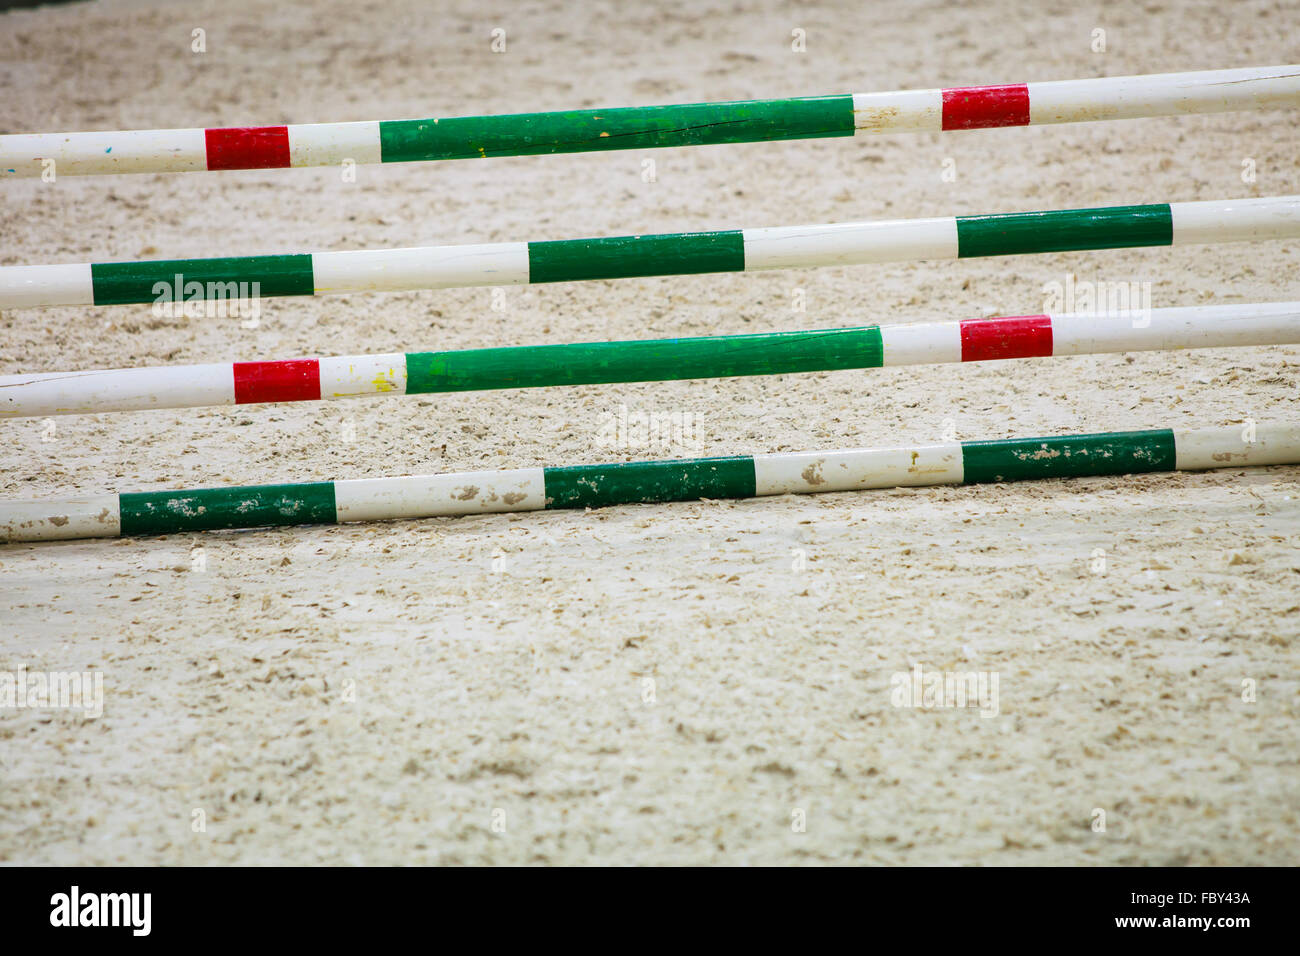 Green red white obstacle for jumping horses. Riding competition. Stock Photo